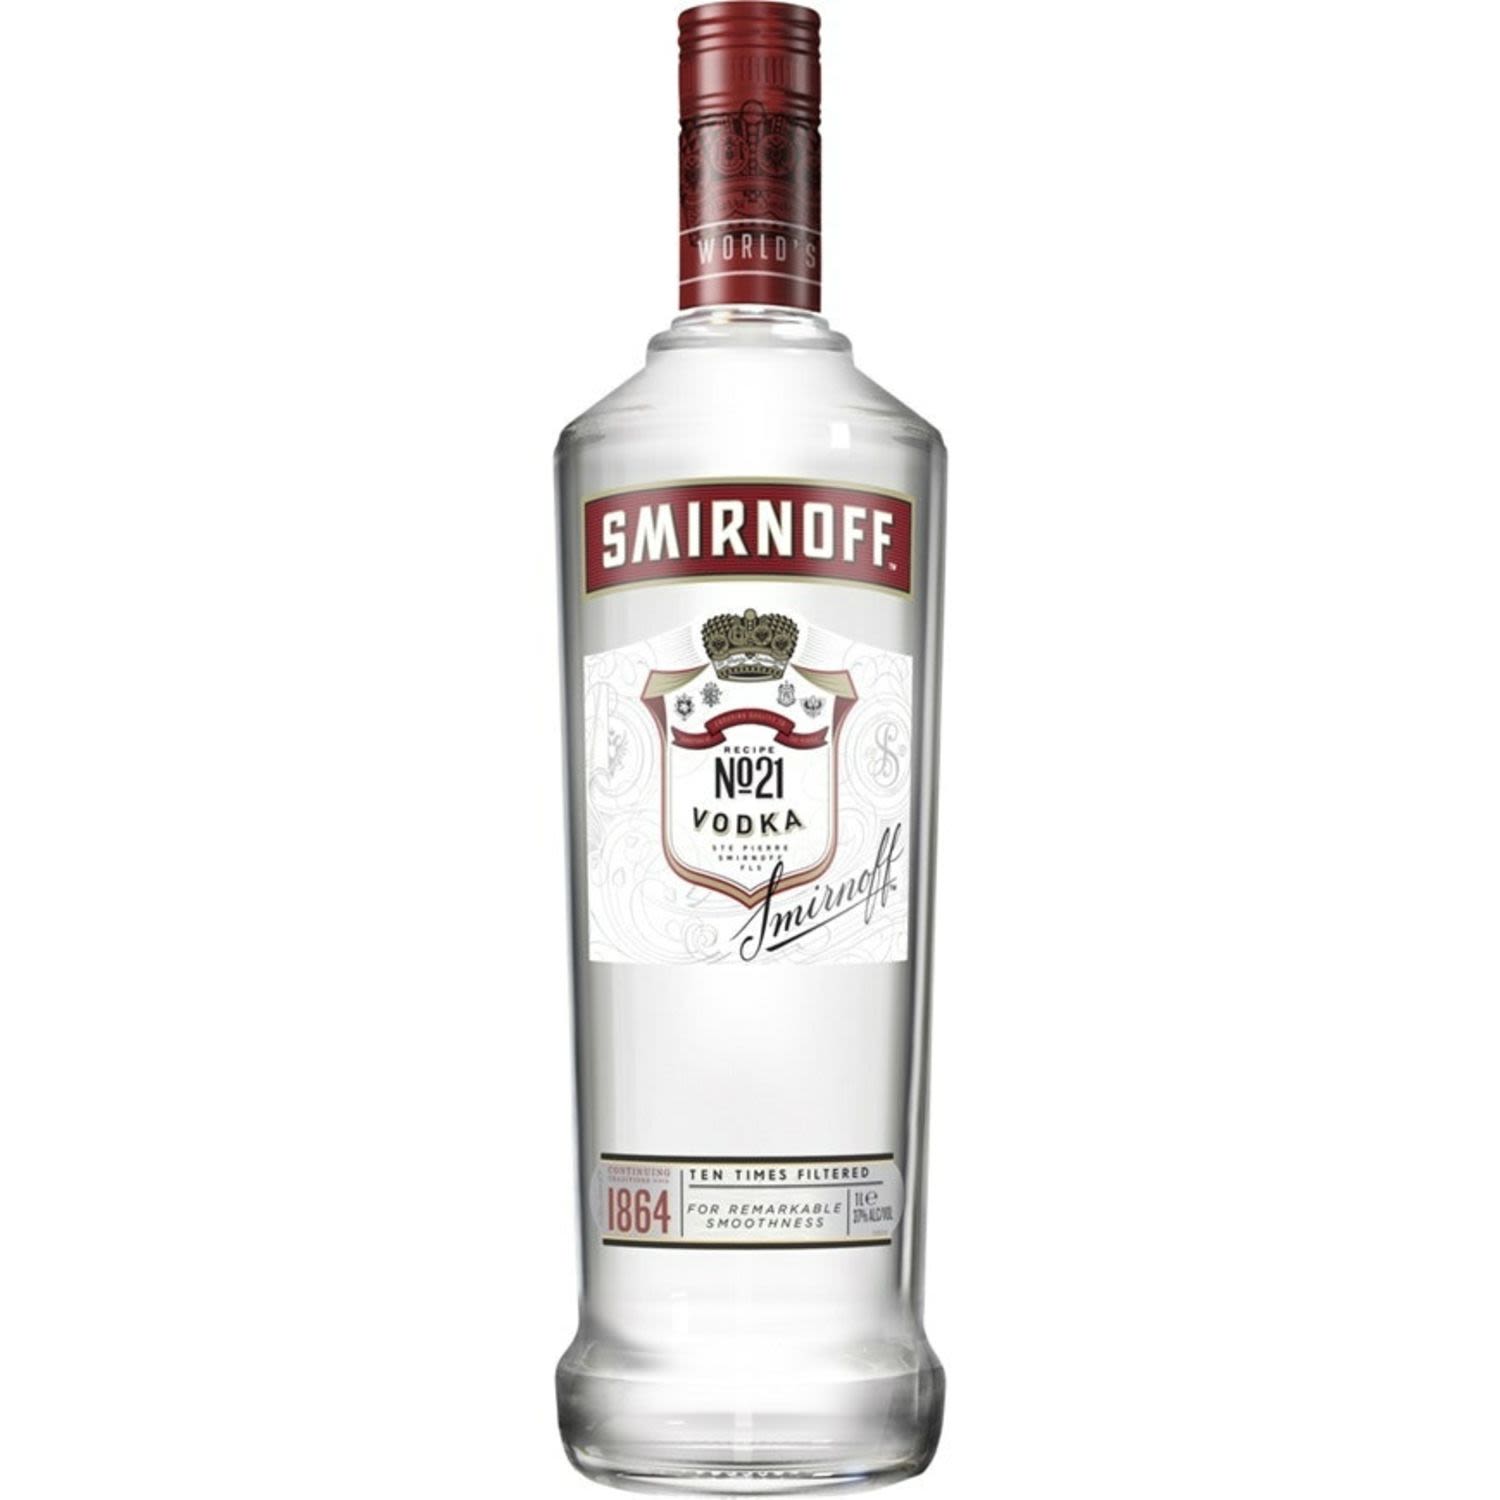 Exceptionally smooth with clean palate<br /> <br />Alcohol Volume: 37.00%<br /><br />Pack Format: Bottle<br /><br />Standard Drinks: 29.2<br /><br />Pack Type: Bottle<br /><br />Country of Origin: Australia<br />